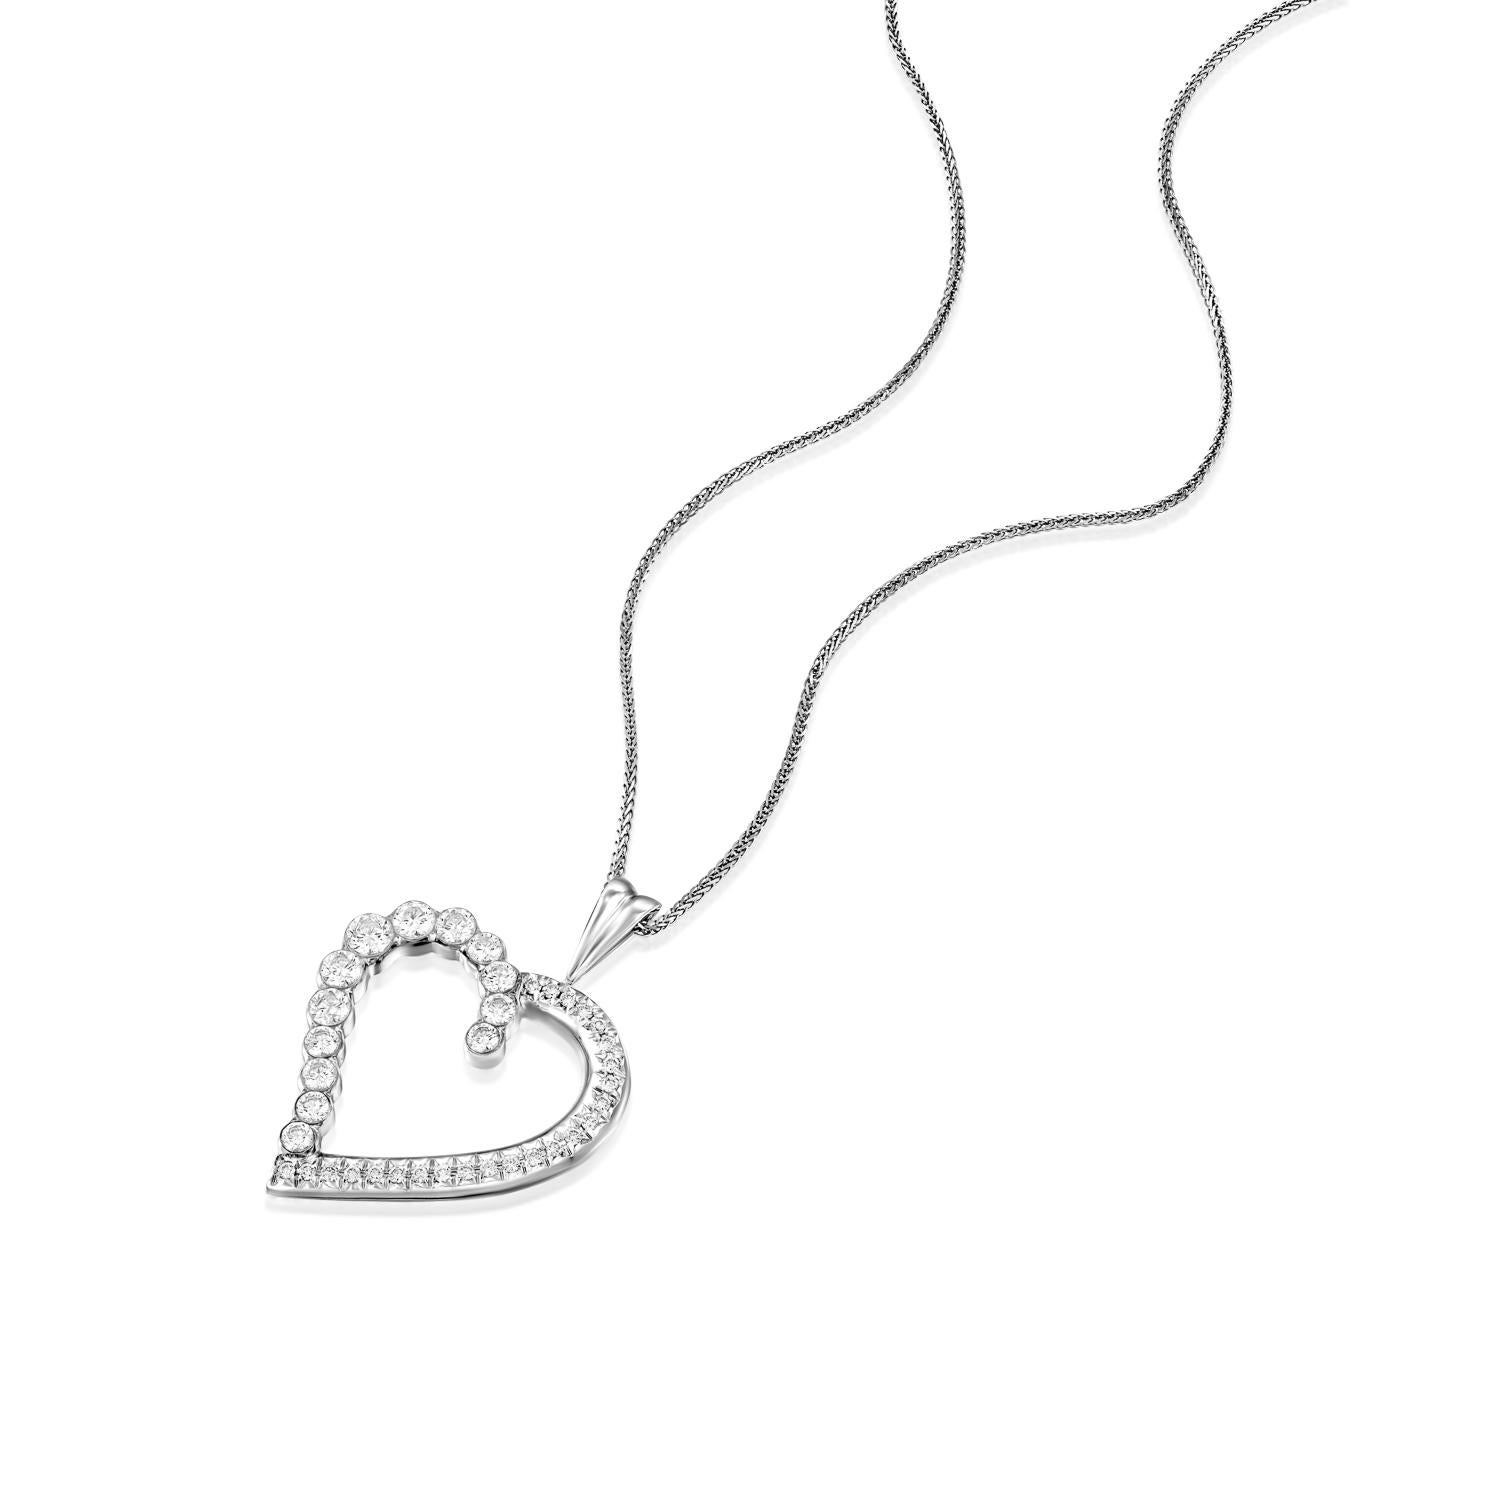 Fall in love with the exquisite Geraldo 1.34 Carat Diamond White Gold Heart Pendant, a true masterpiece of jewelry design. This pendant features a seamless, heart-shaped design, expertly crafted with half of the pendant invisibly set to create a